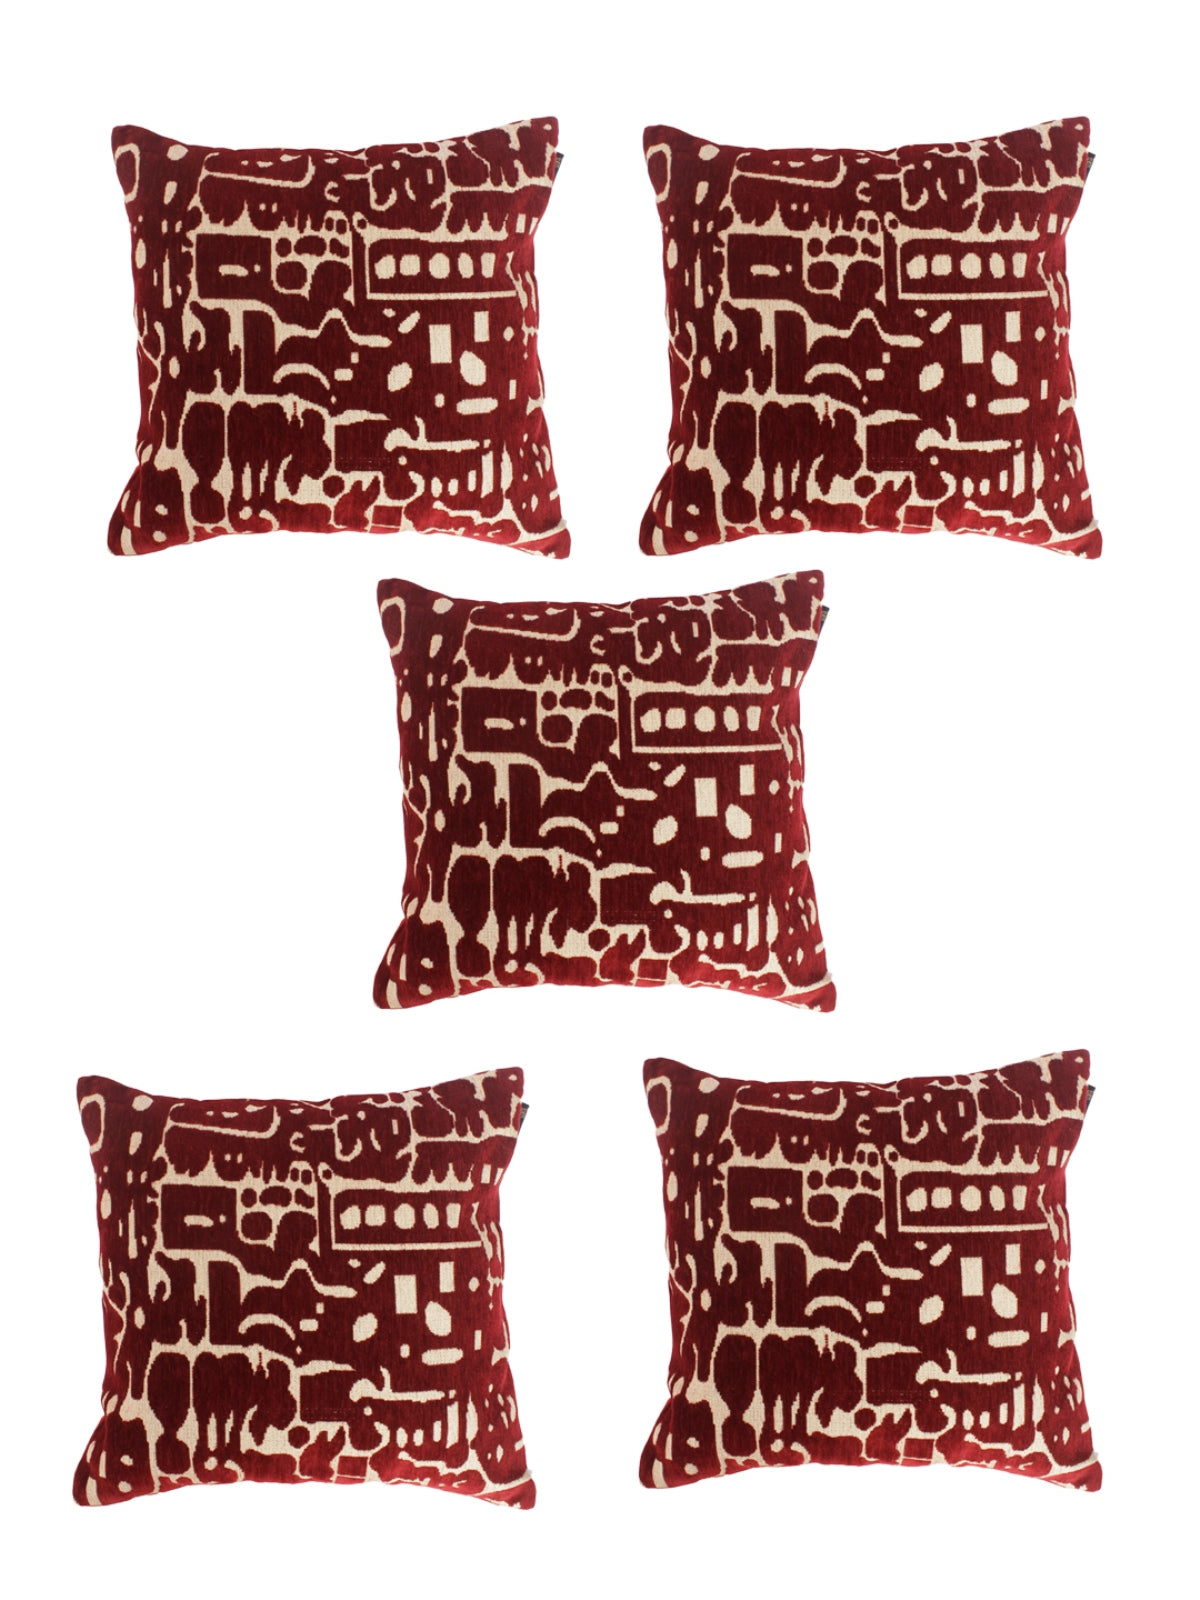 Soft Chenille Textured Designer Cushion Covers 16 inch x 16 inch, Set of 5 - Maroon